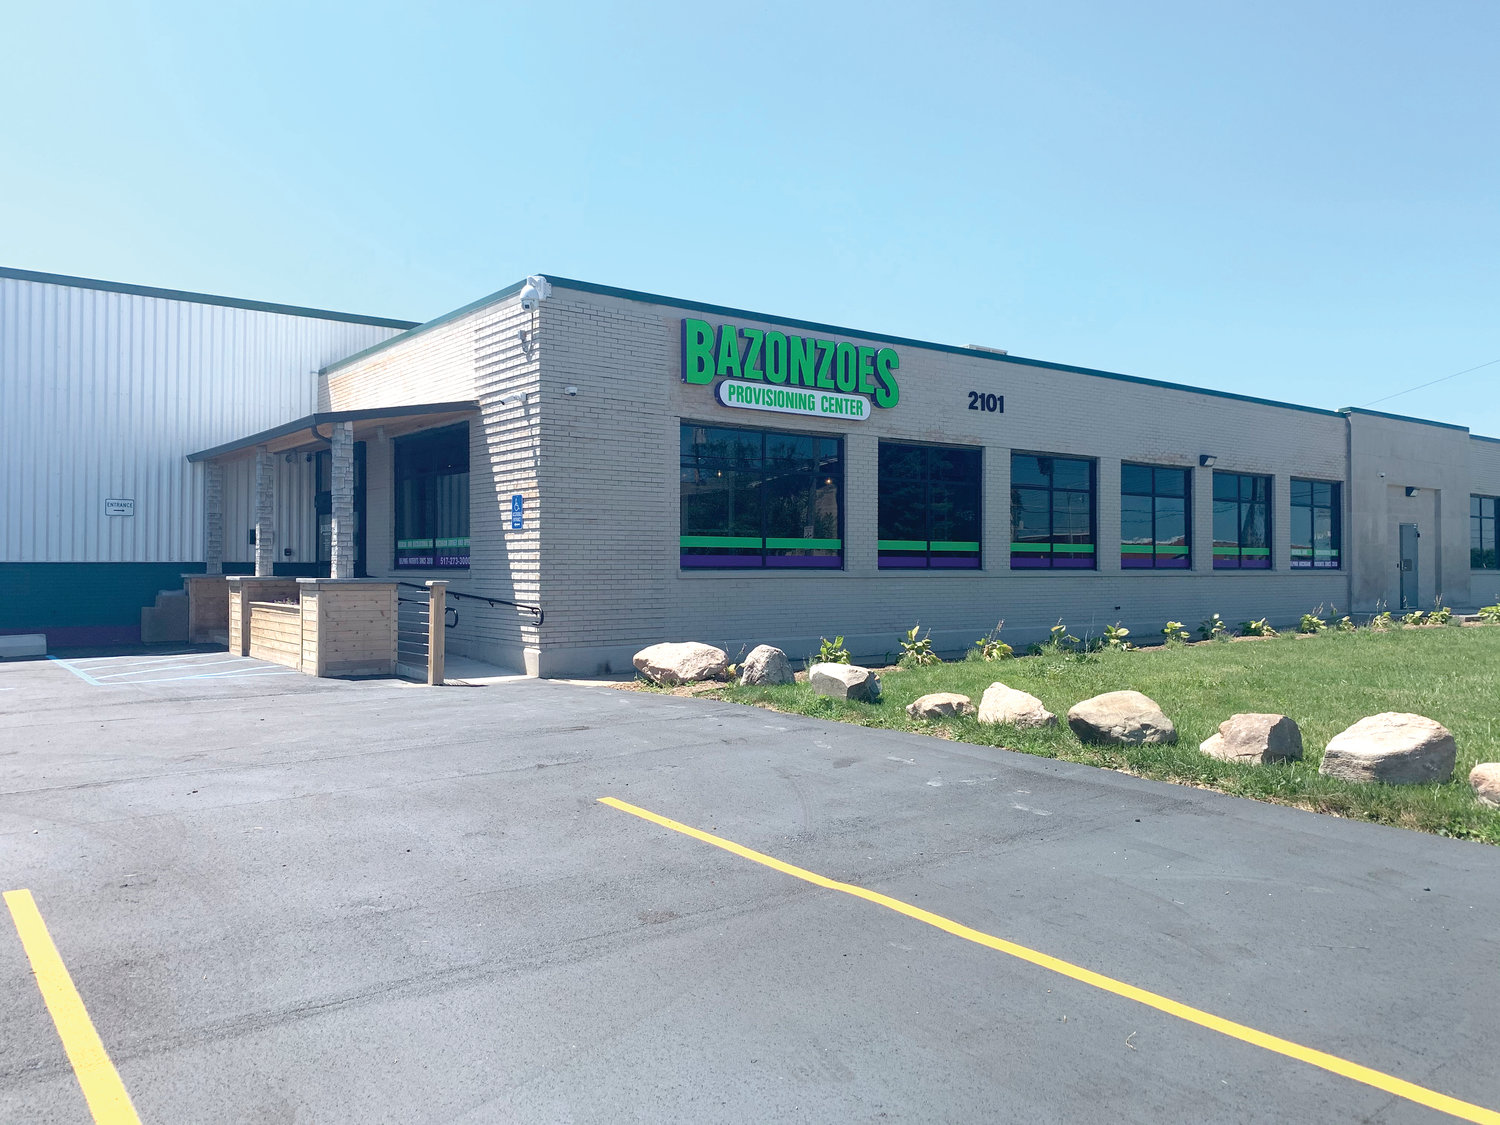 Bazonzoes plans to open a dispensary attached to a growing facility across from Deluca’s Pizza on W. Willow Street in Lansing.